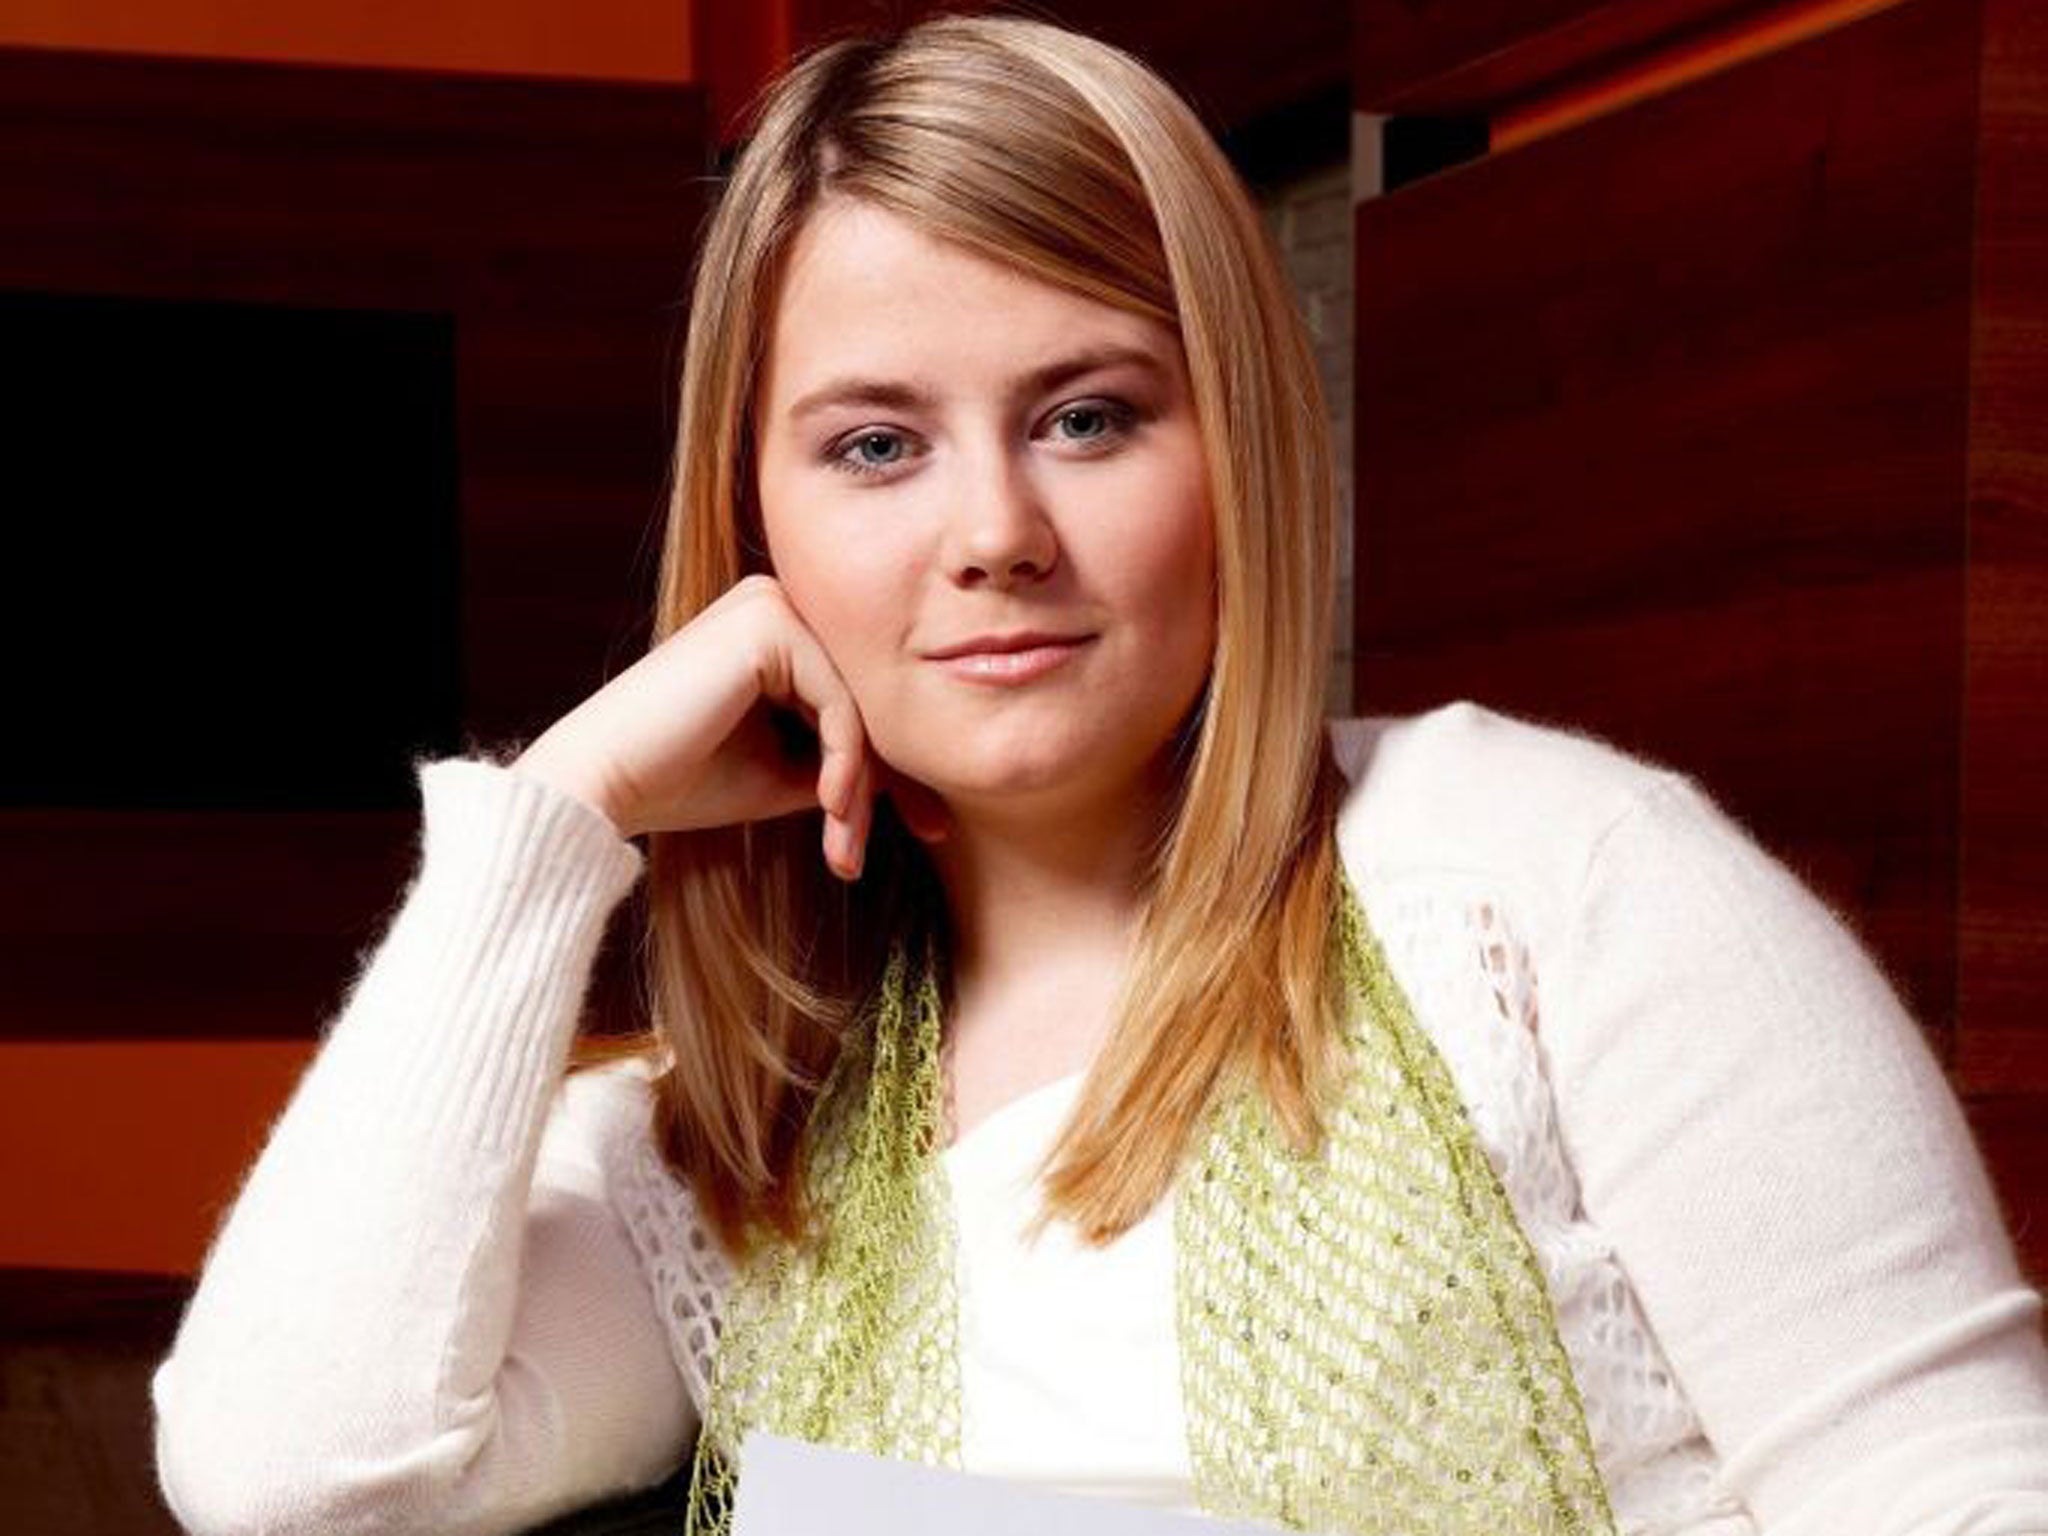 Film reveals how kidnap victim Natascha Kampusch was raped by abductor The Independent The Independent picture